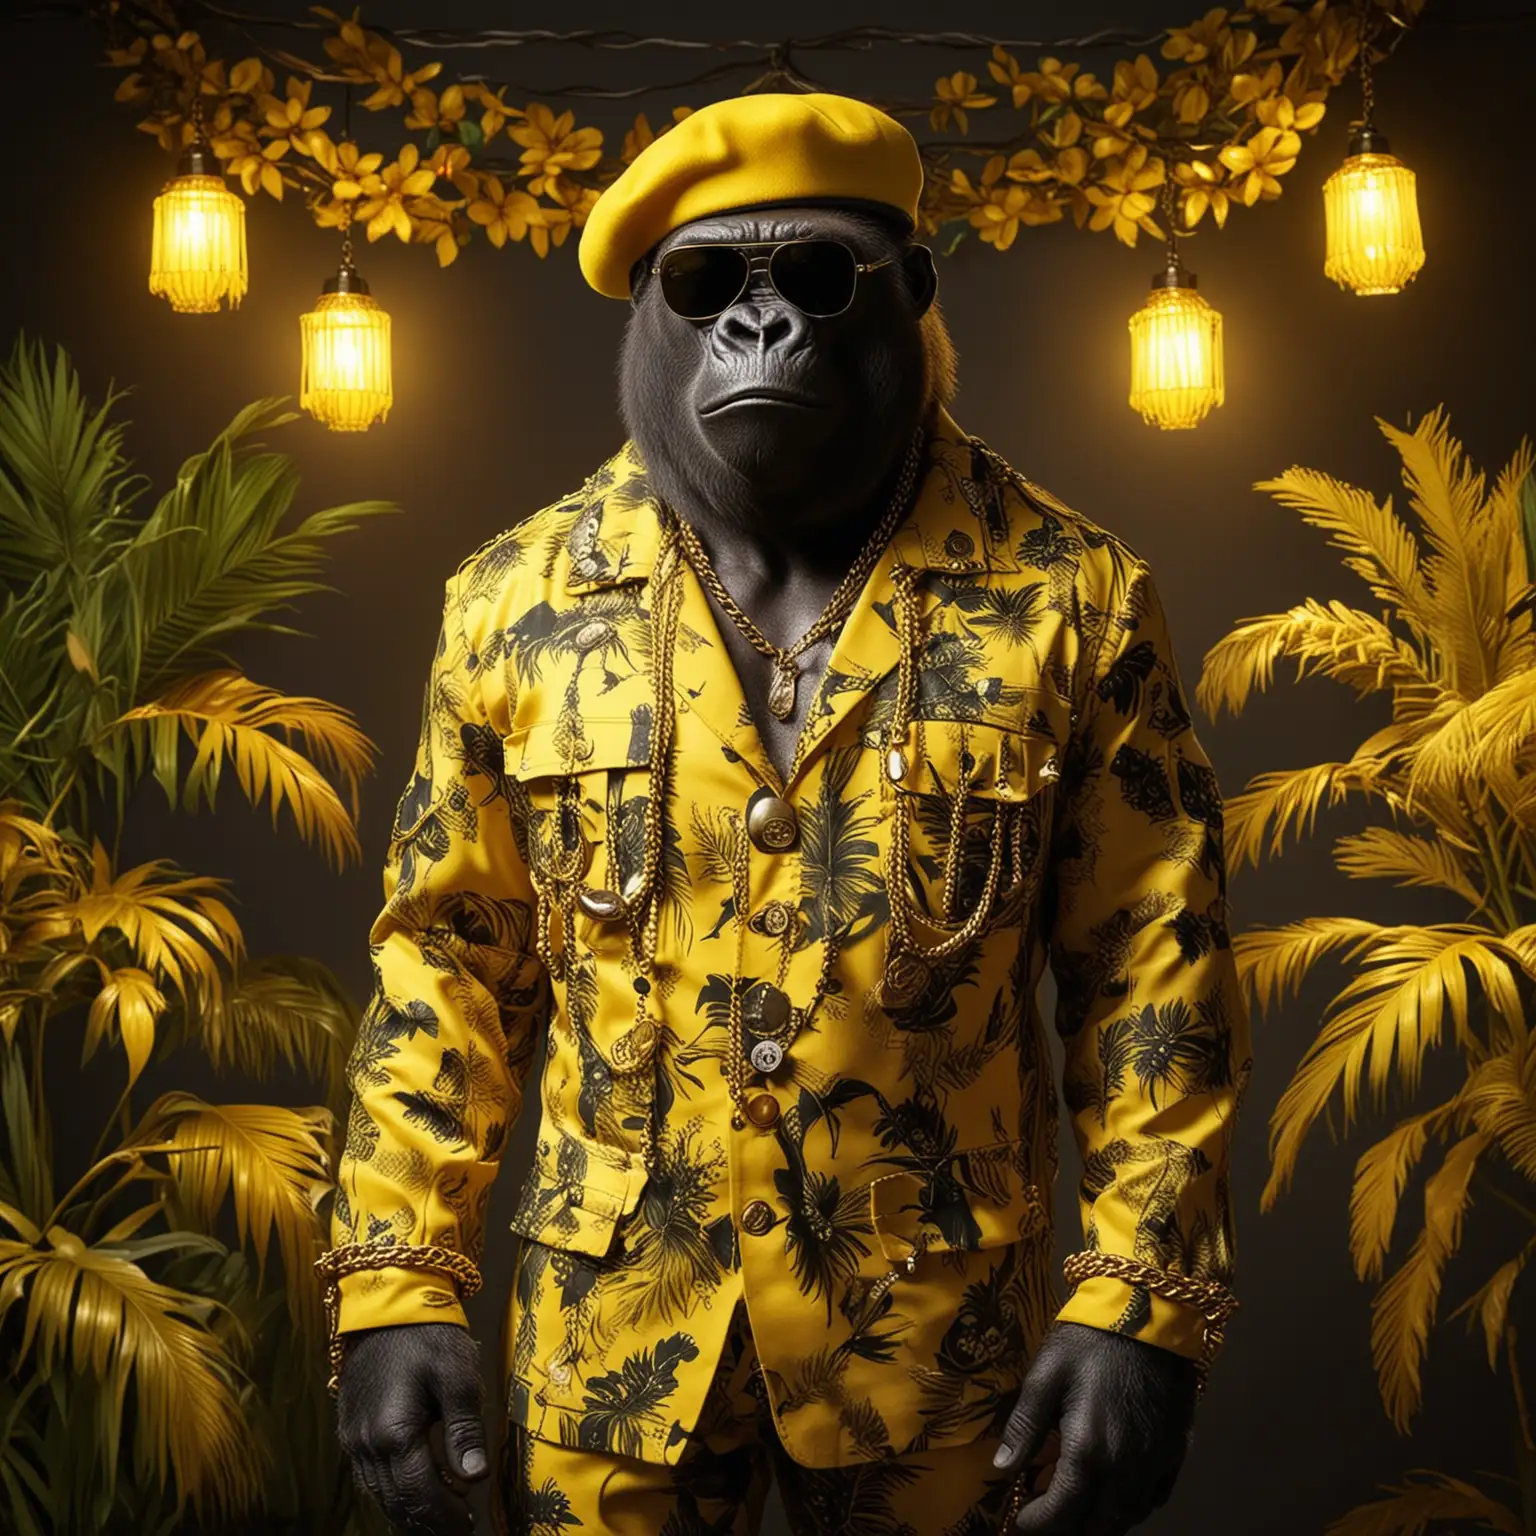 Gorilla is wearing yellow hawaiian pattern military clothes with ornaments and gold chains. He also wears a yellow beret and dark sunglasses. He is standing with yellow neon  lights behind him